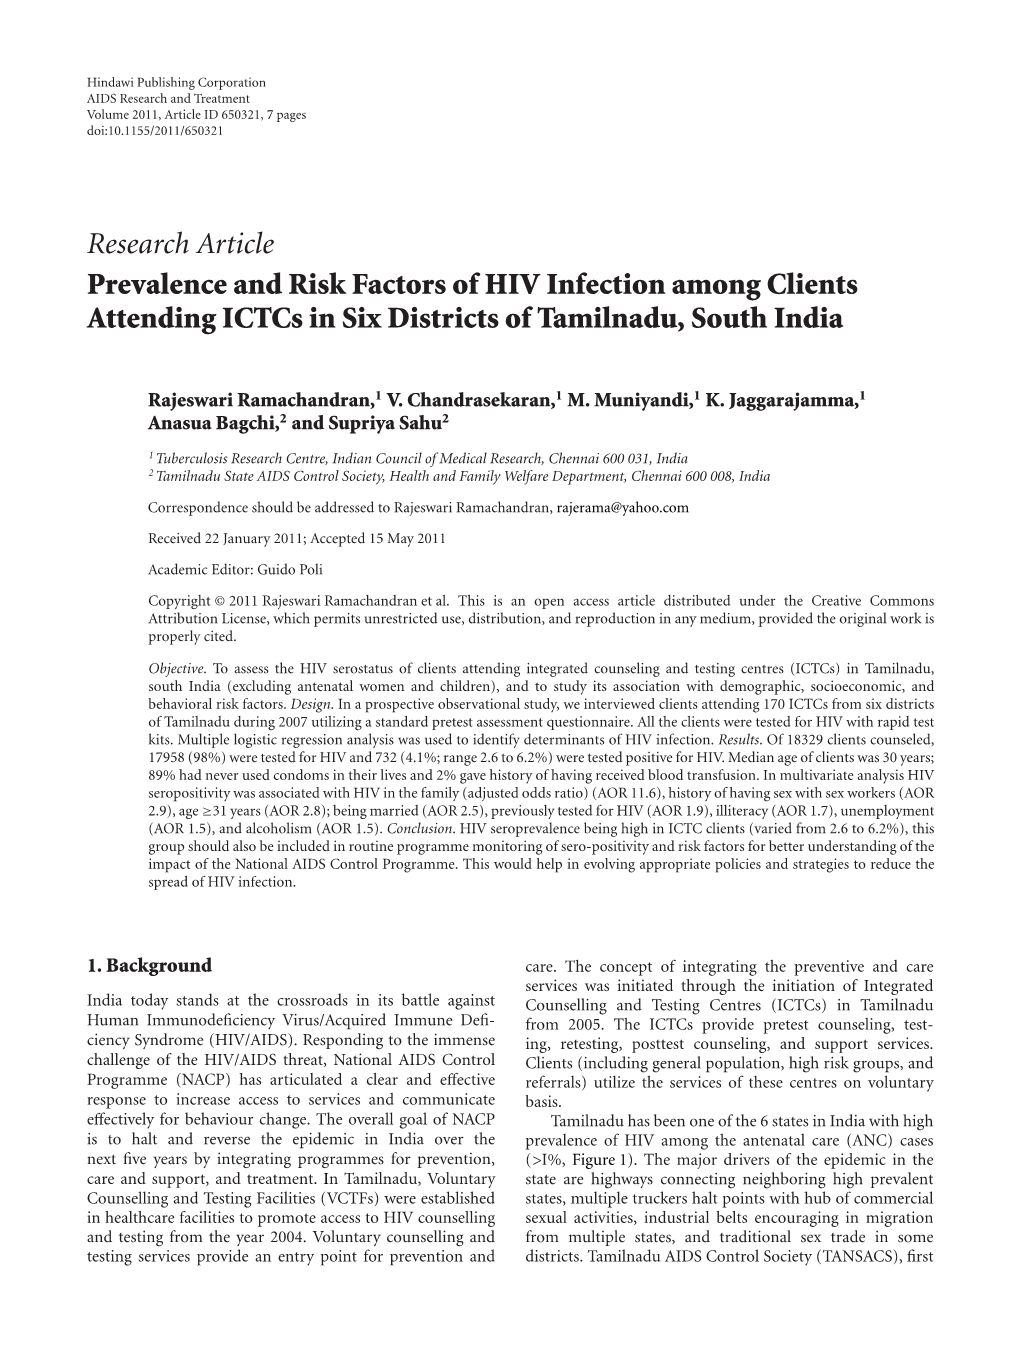 Research Article Prevalence and Risk Factors of HIV Infection Among Clients Attending Ictcs in Six Districts of Tamilnadu, South India